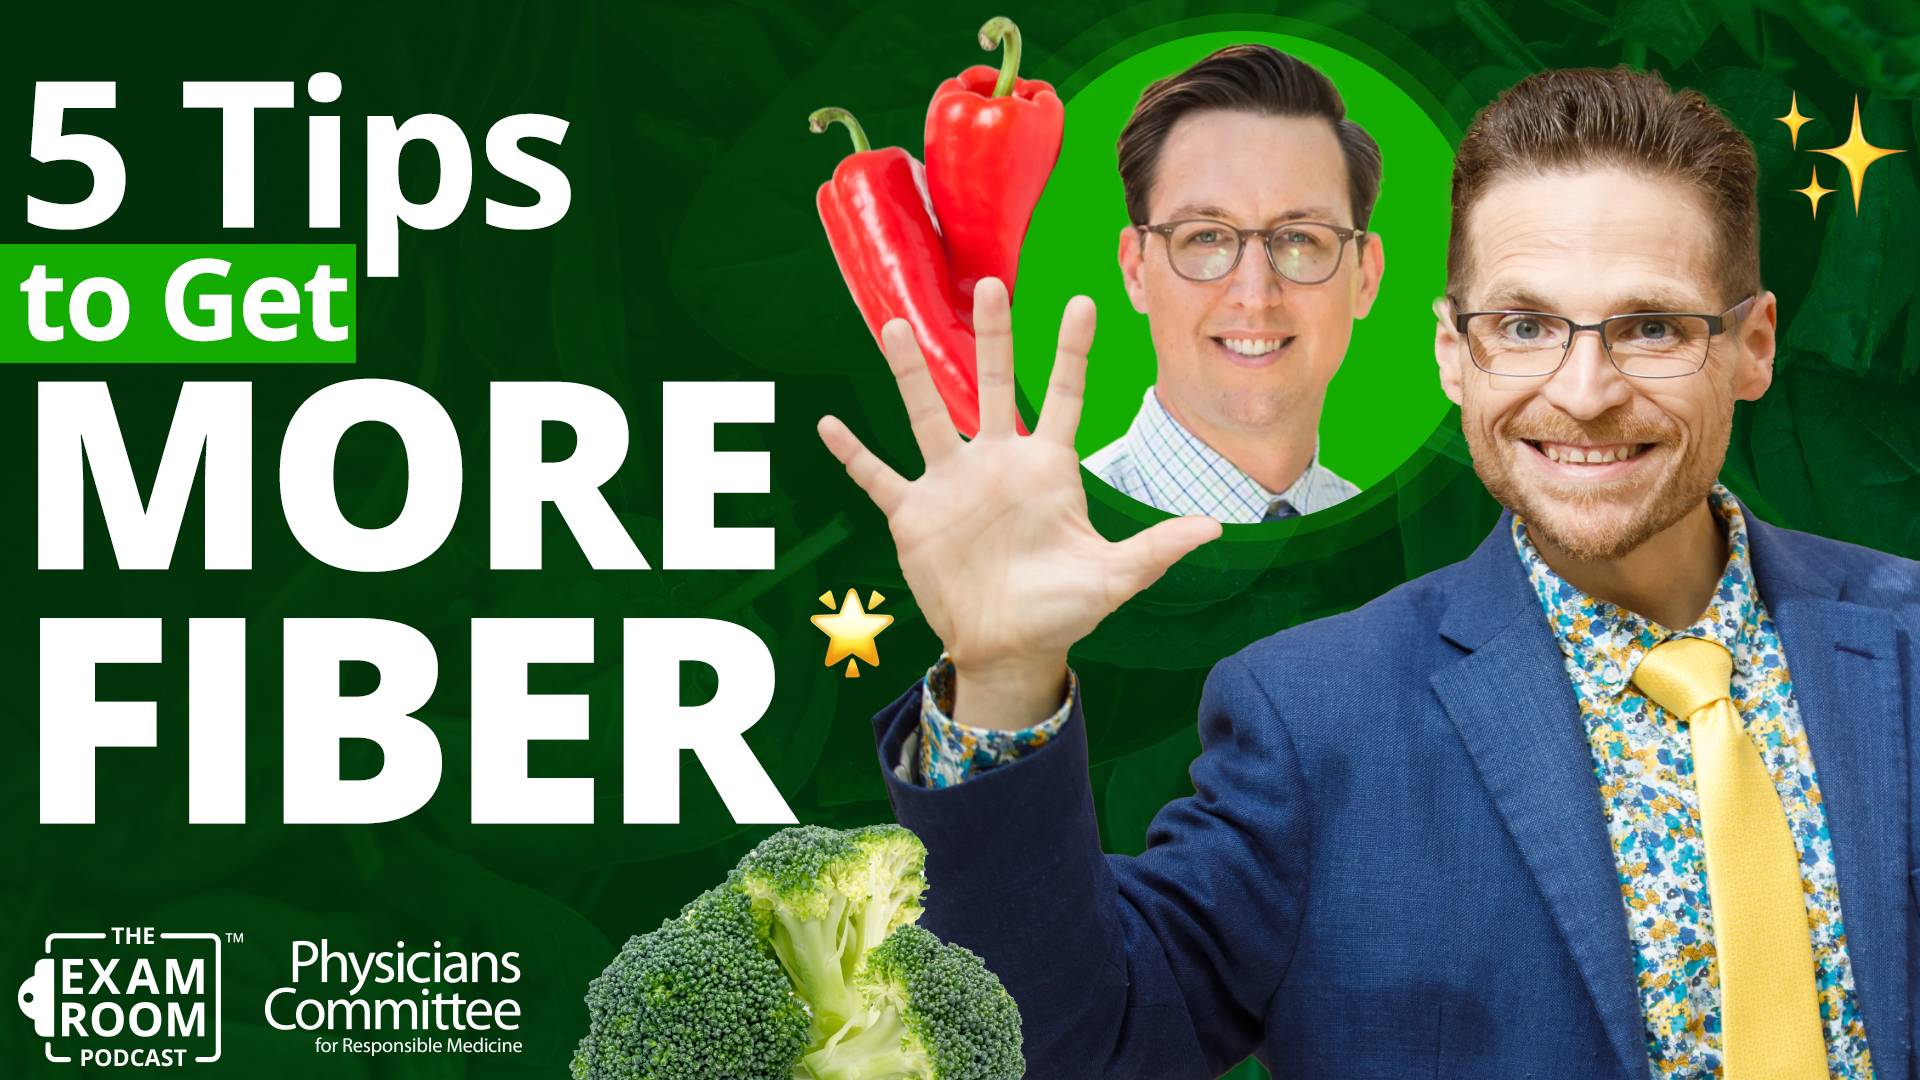 5 Easy Ways to Get More Fiber | Dr. Will Bulsiewicz Live Q&A